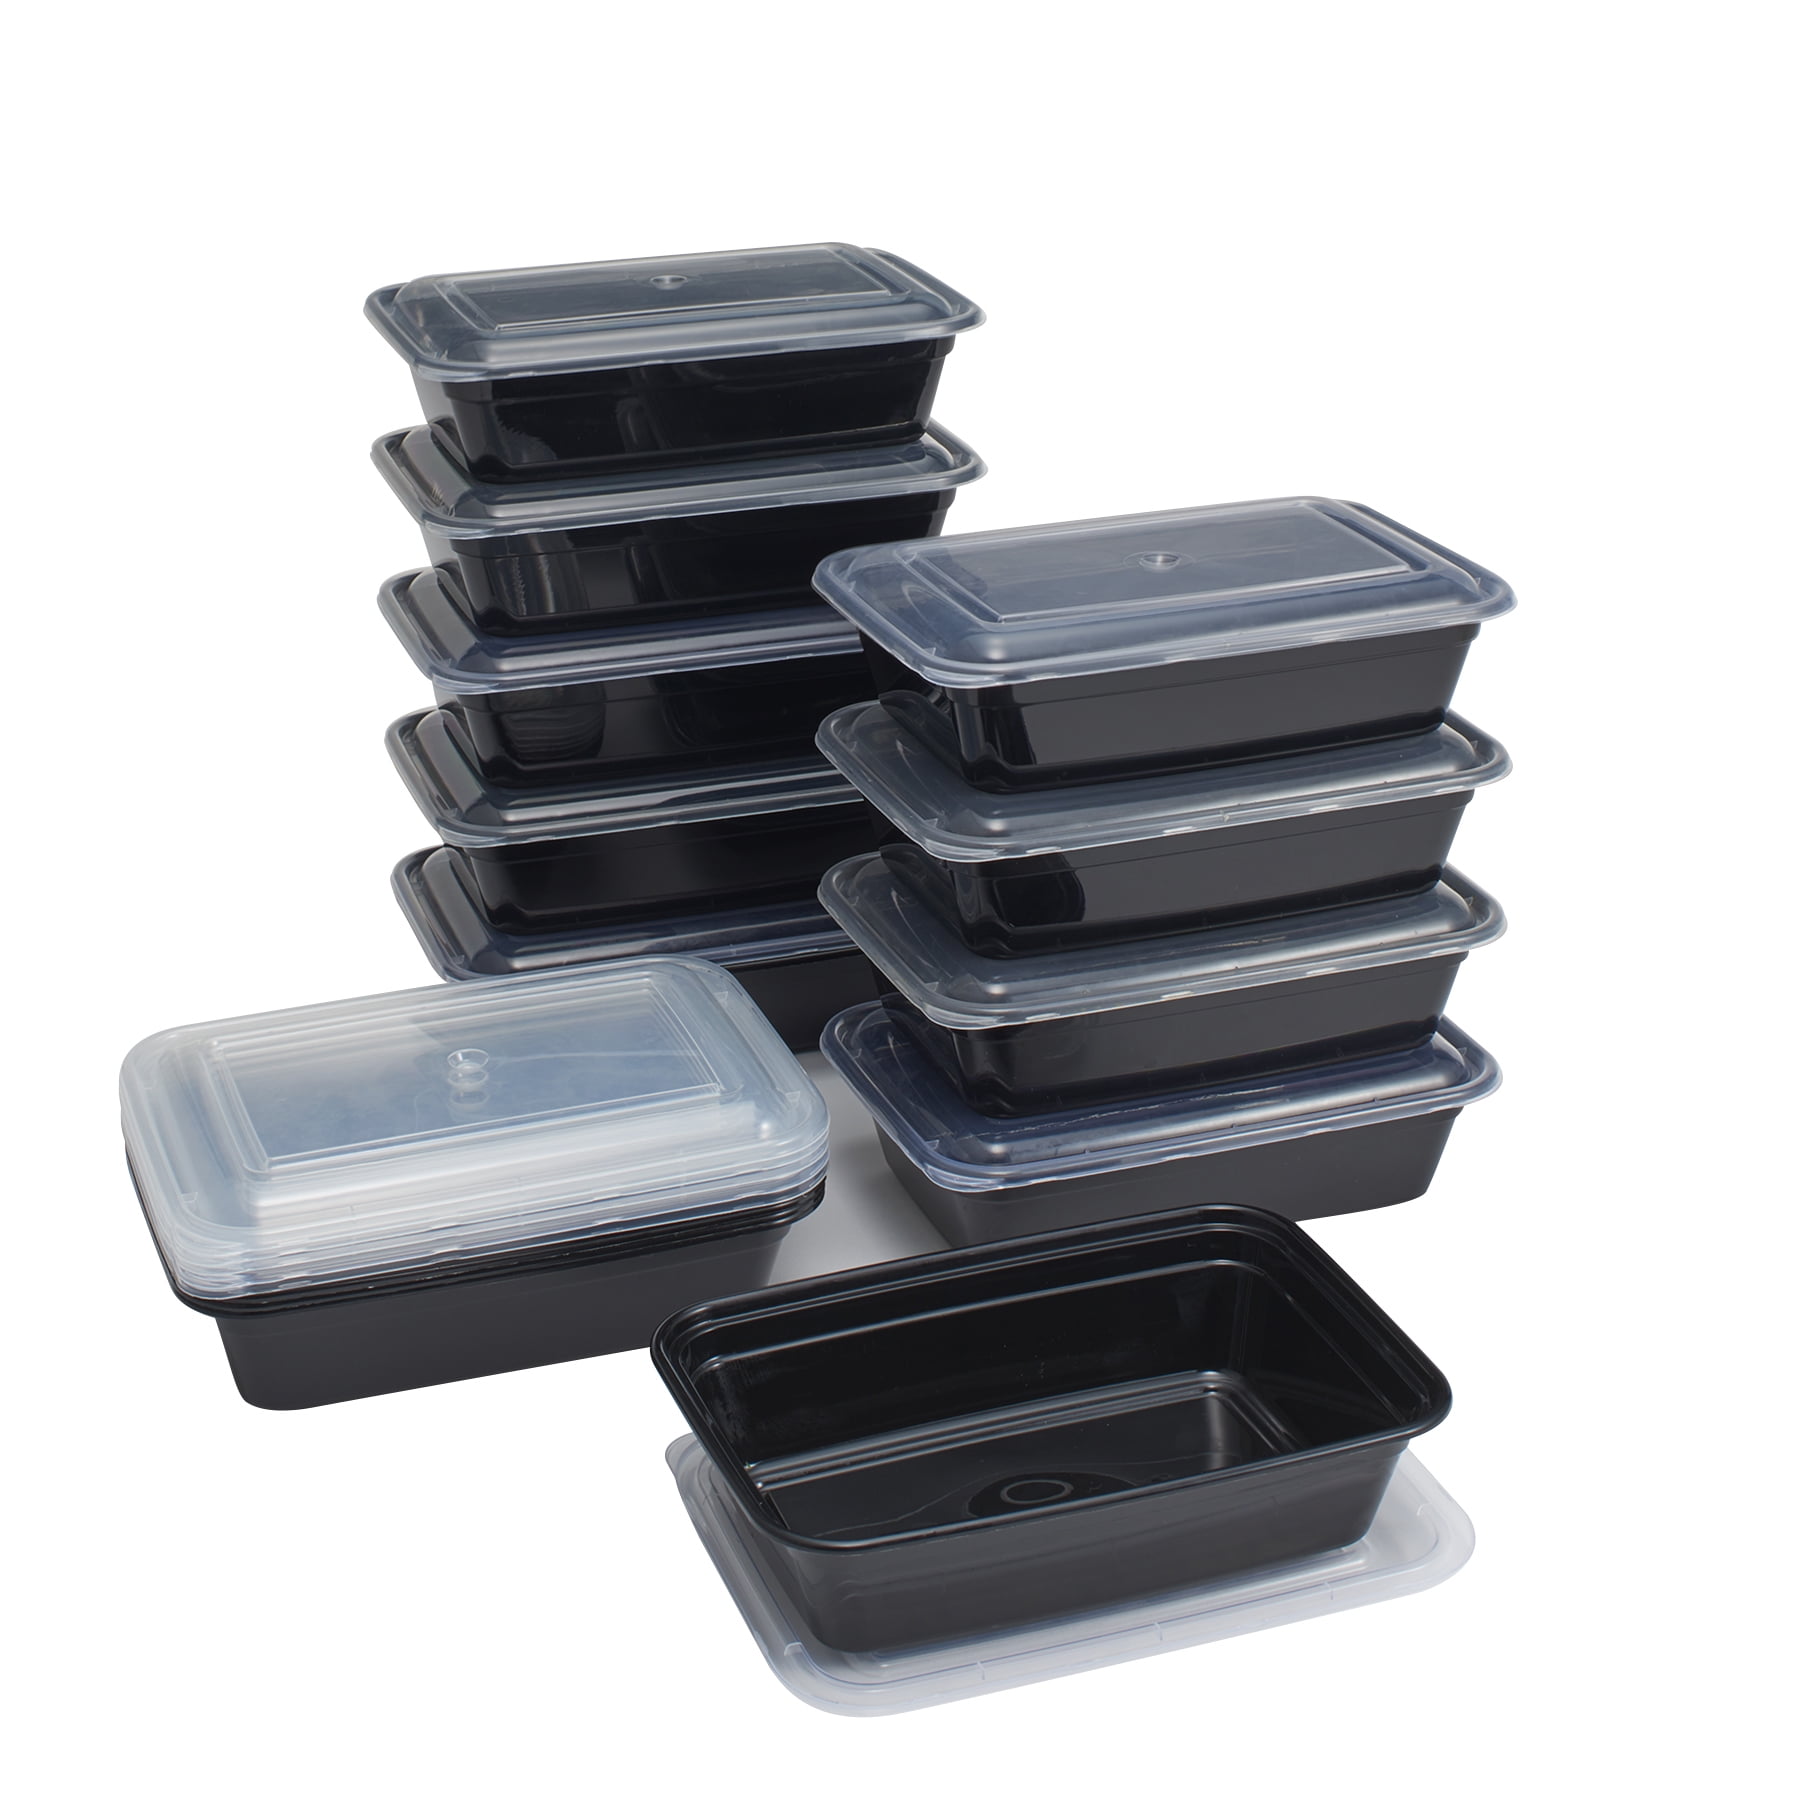 Mainstays 30 Piece 4.2 Cup Meal Prep Food Storage Containers